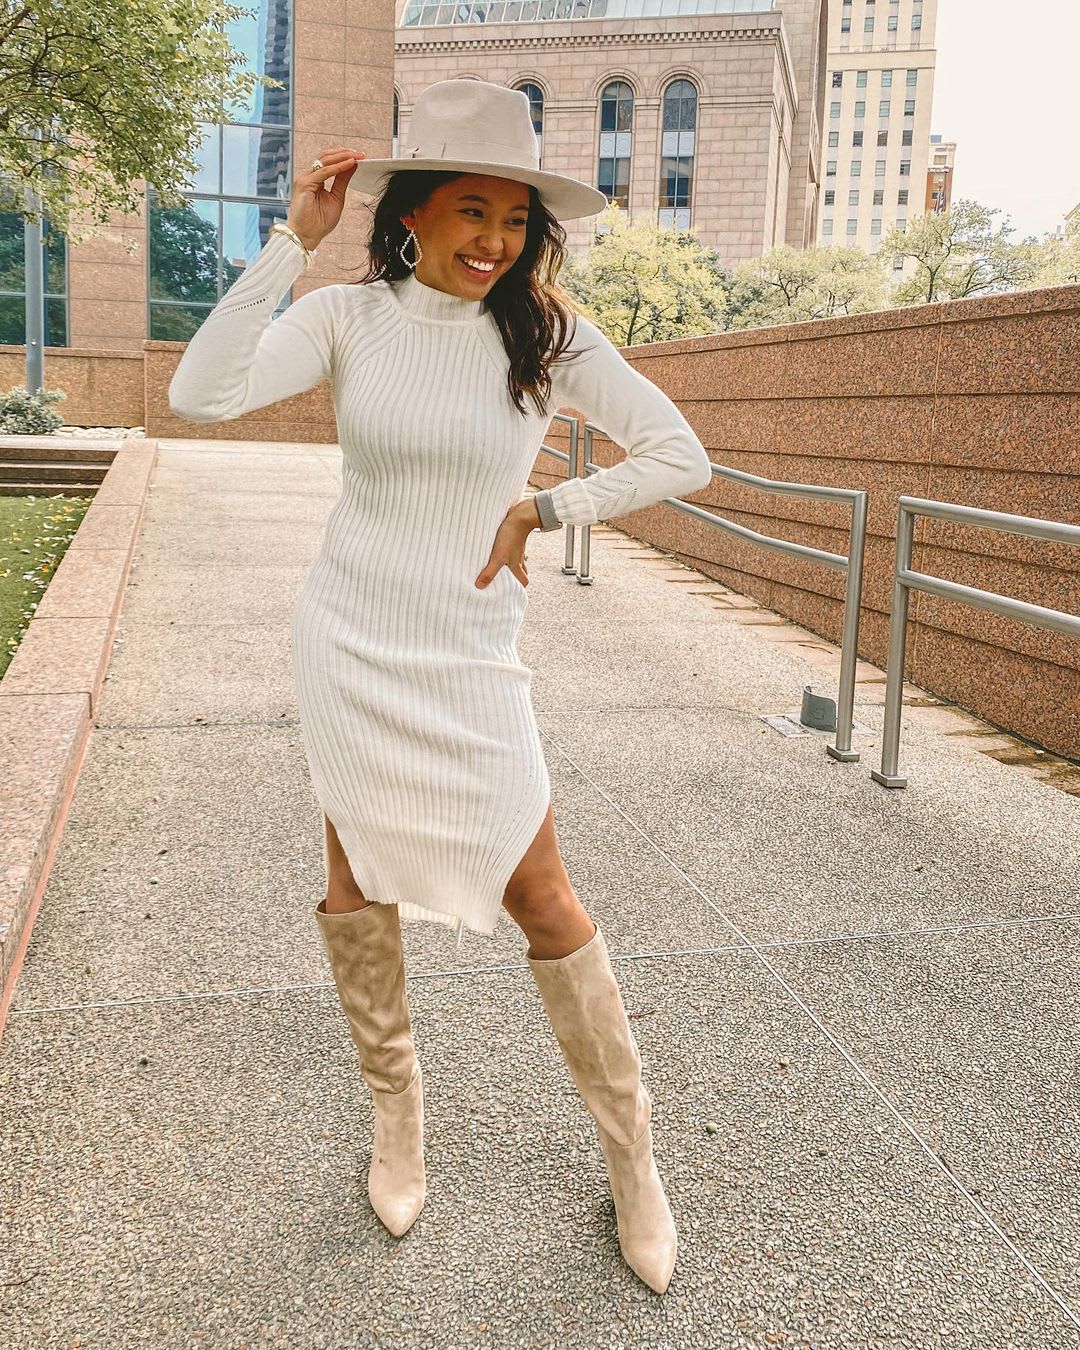 sweater dress with long boots